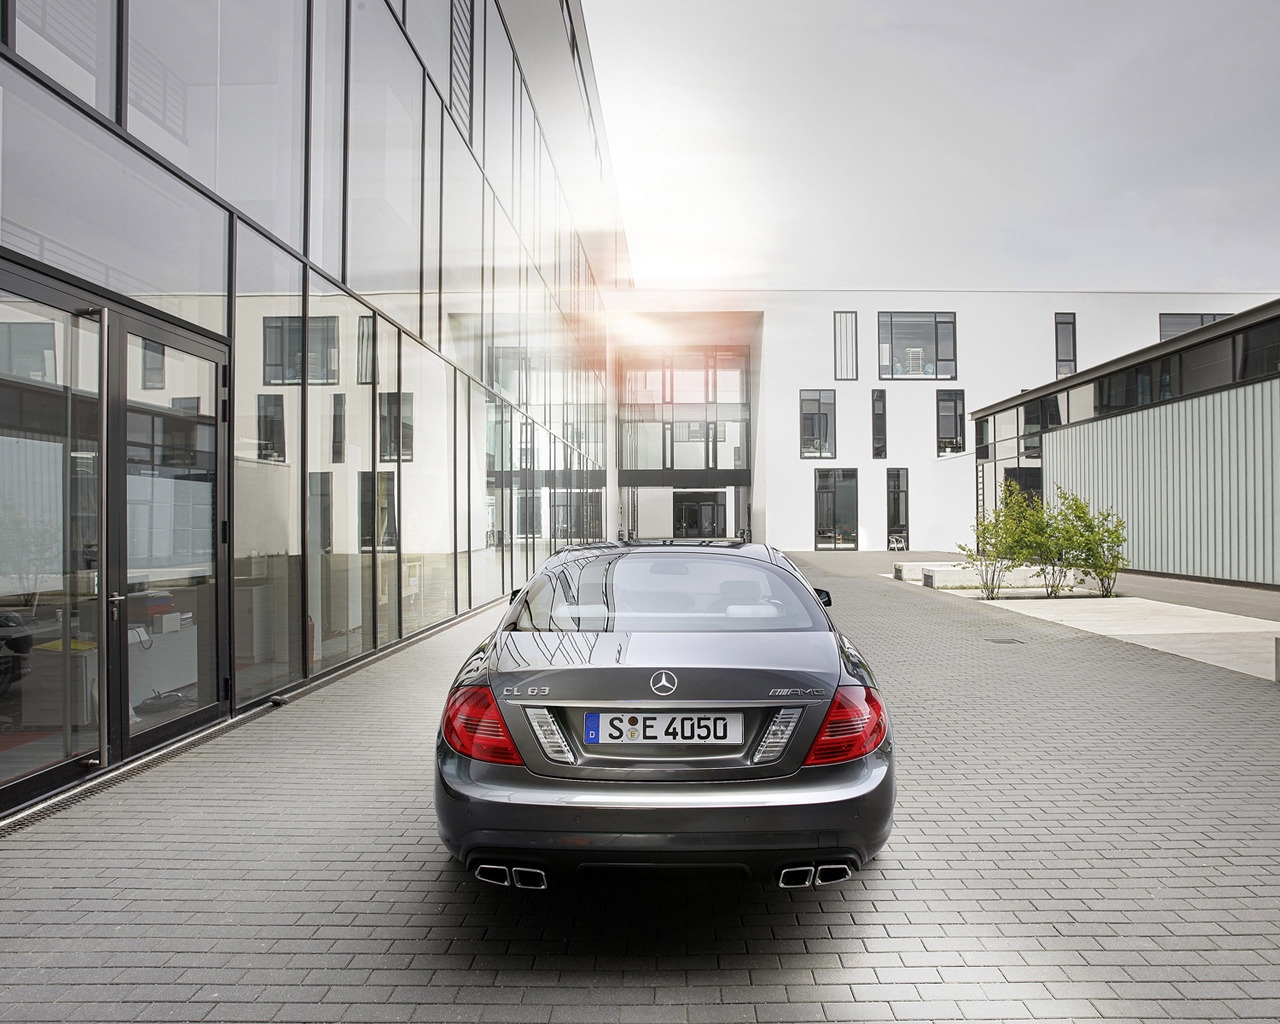 Mercedes CL63 AMG 2011 Rear for 1280 x 1024 resolution